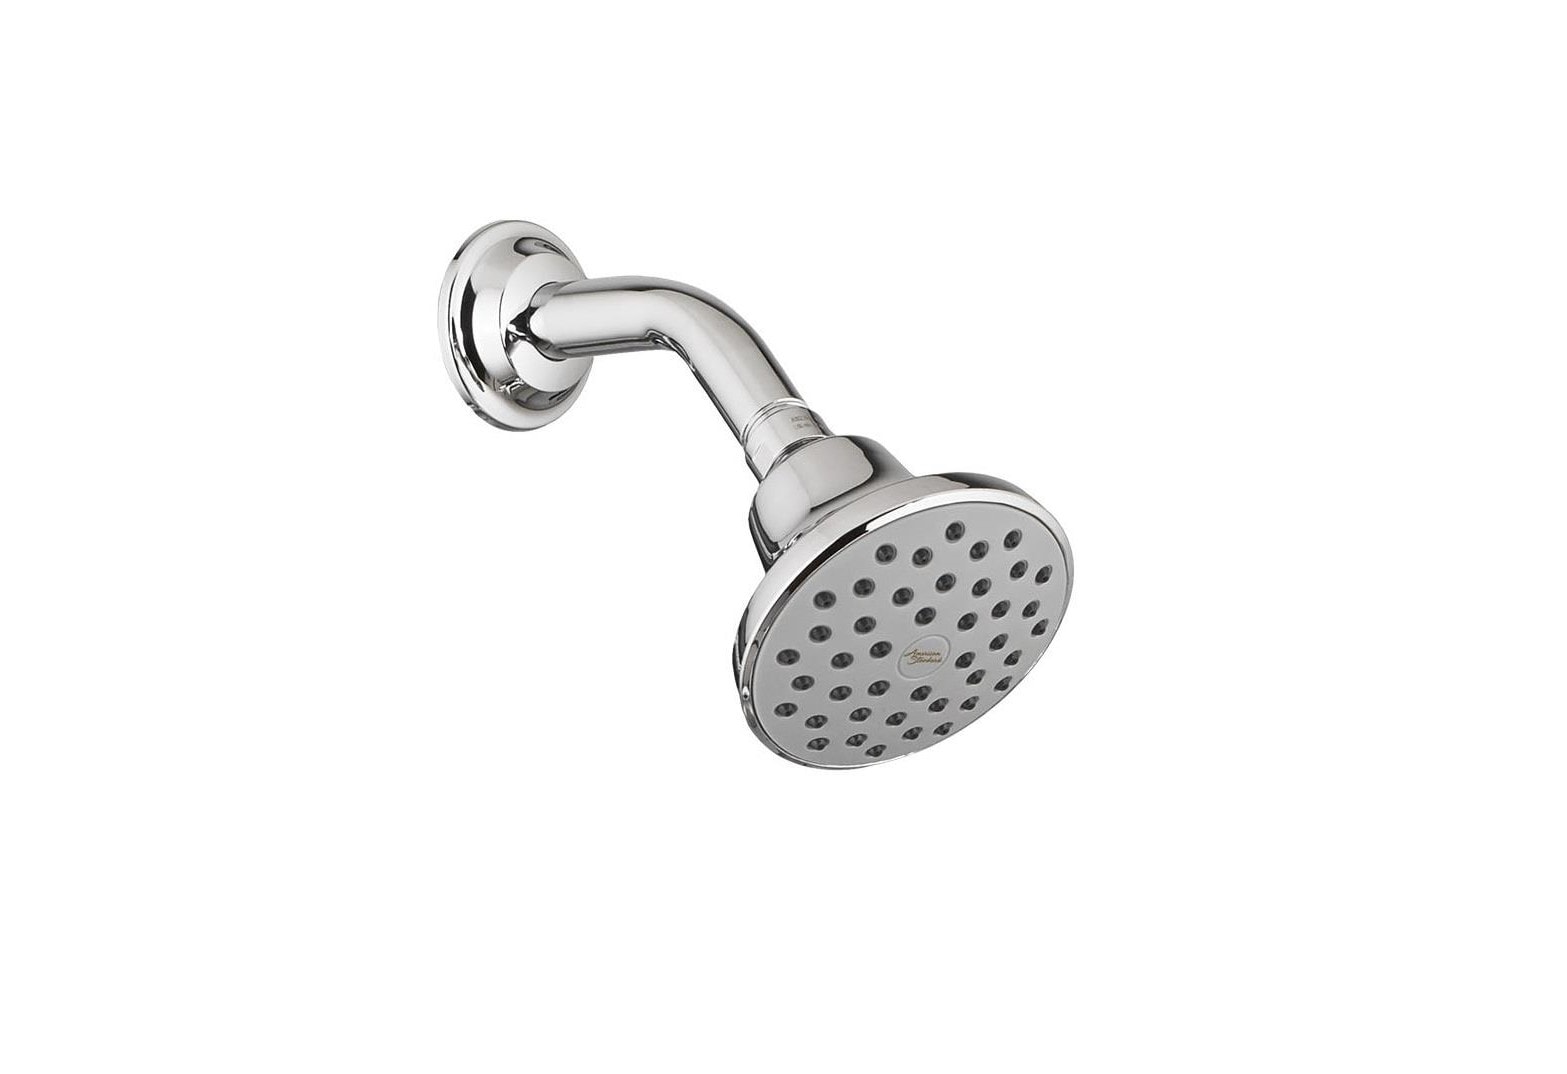 Colony Polished Chrome Round Fixed Shower Head 1.75-GPM (6.6-LPM) | - American Standard 1660512.002